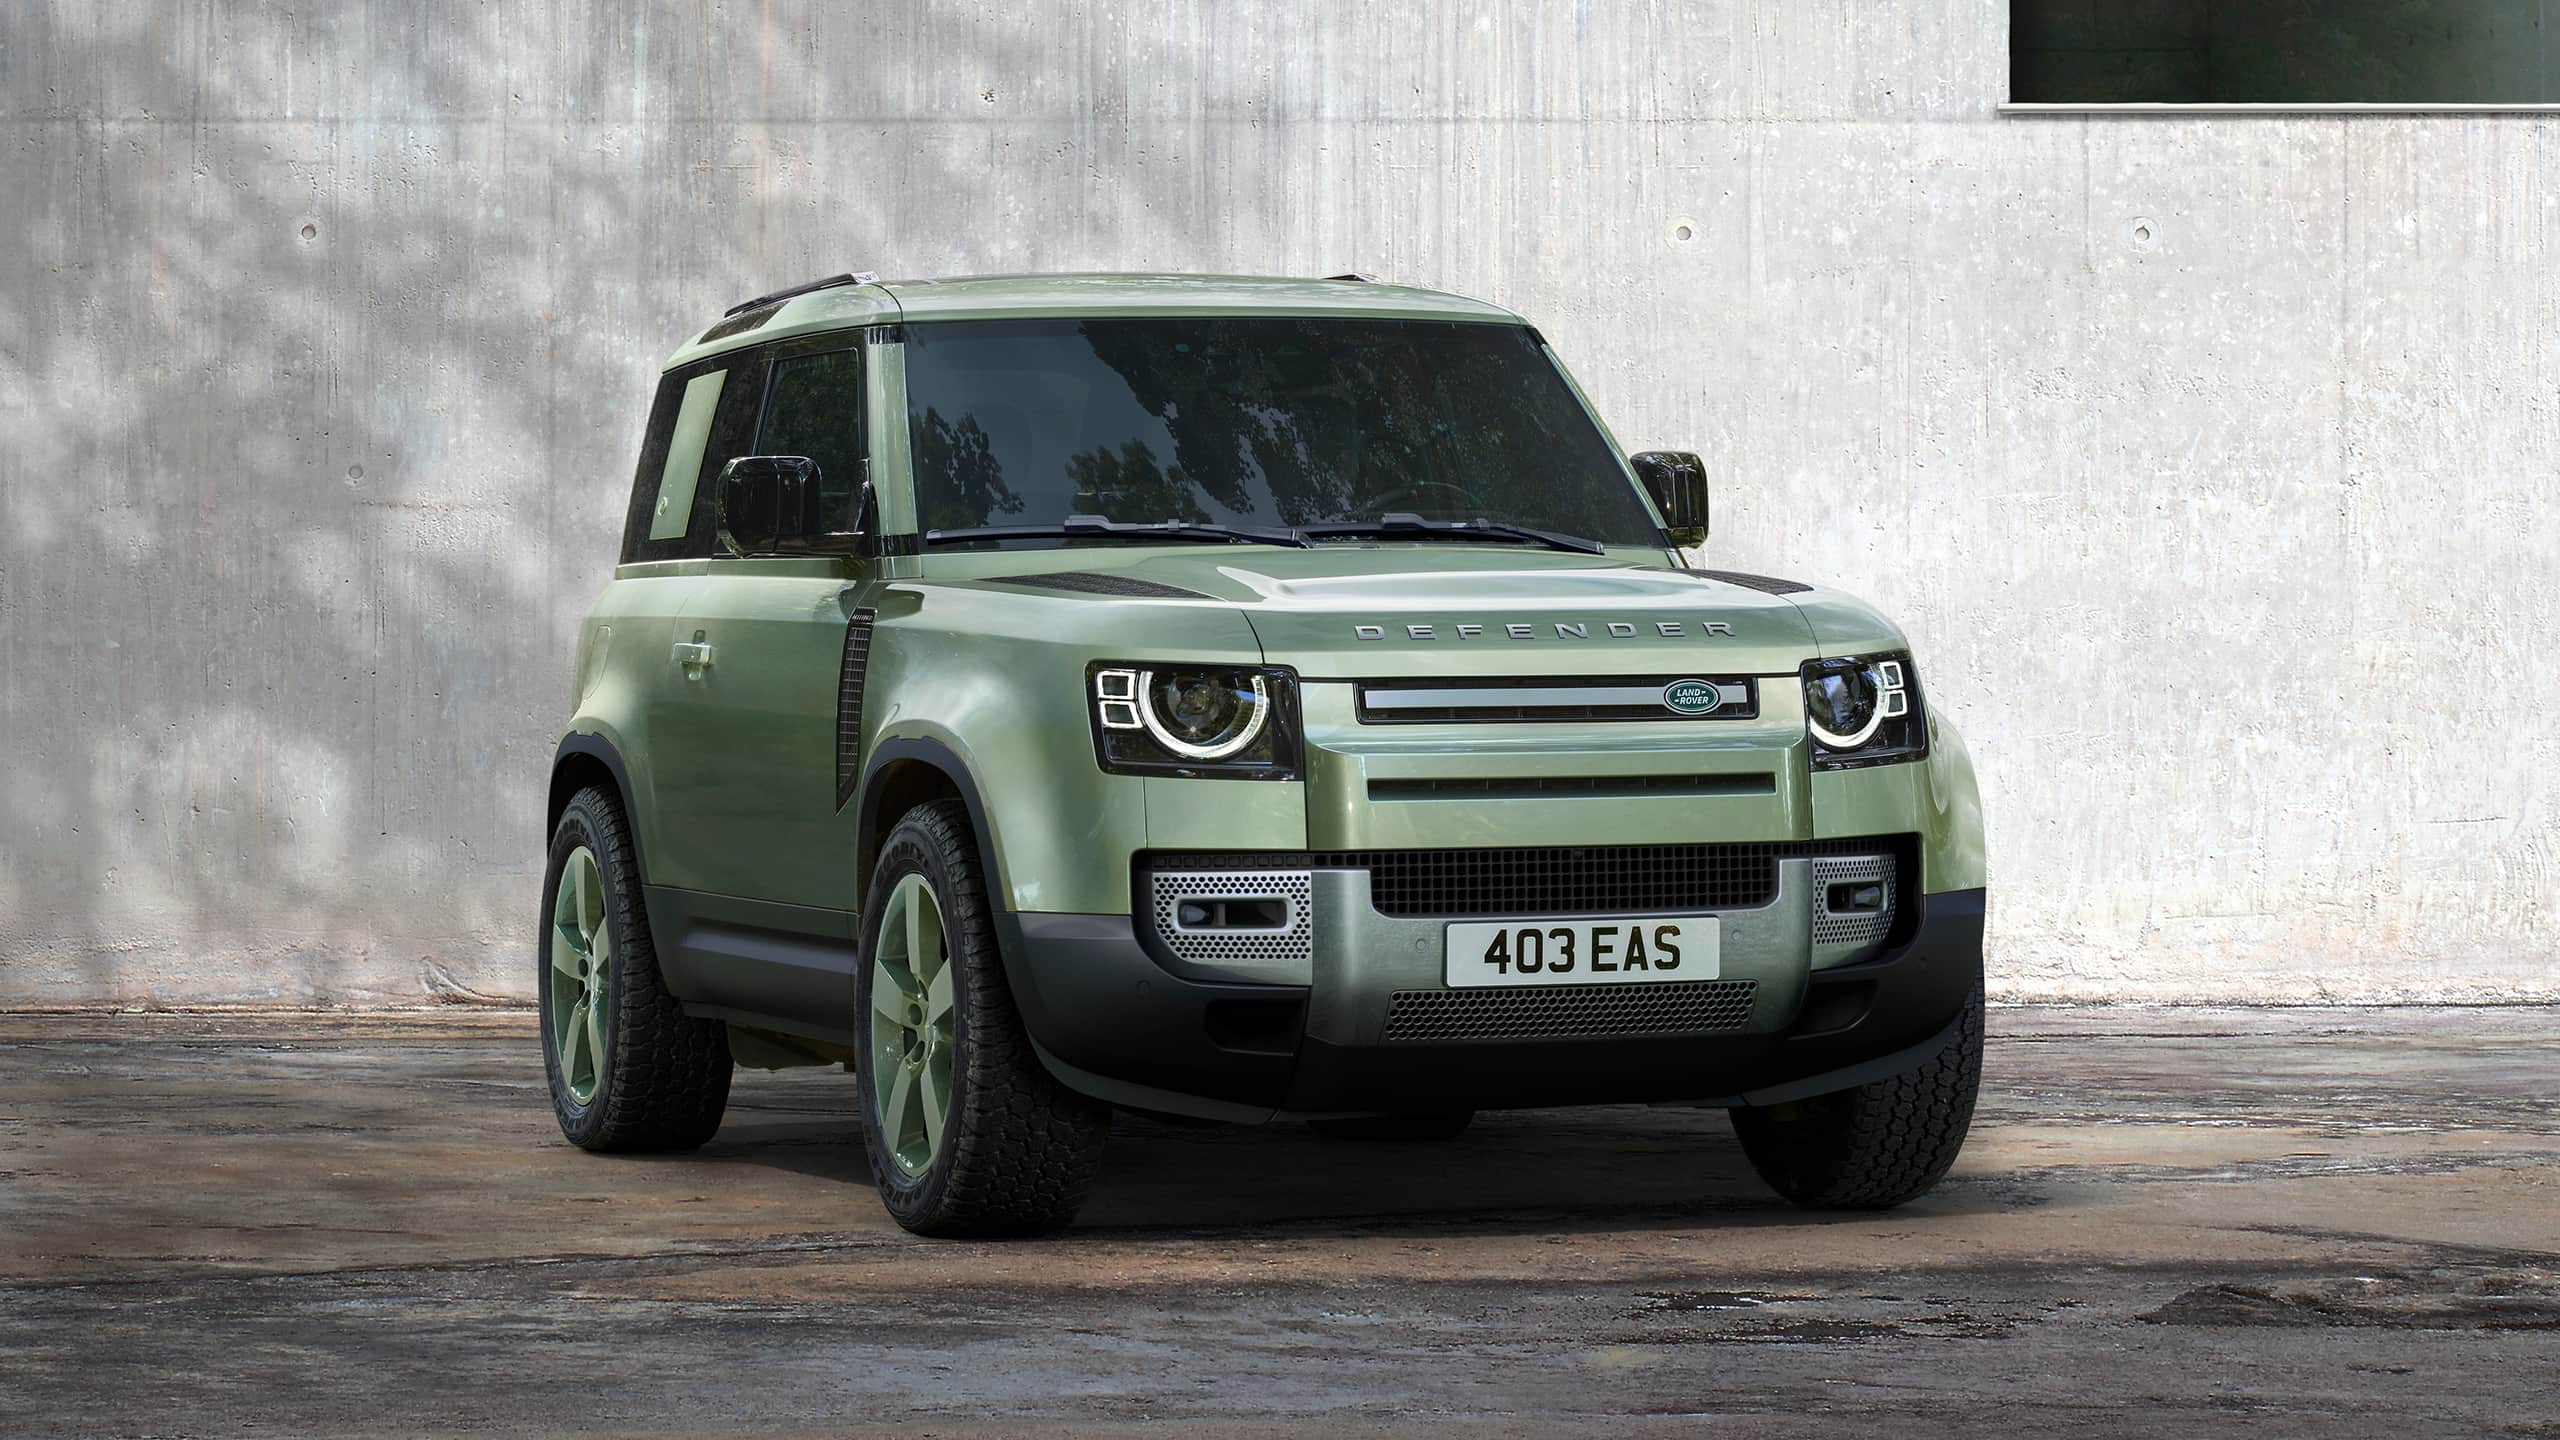 The Land Rover Defender | Land Rover